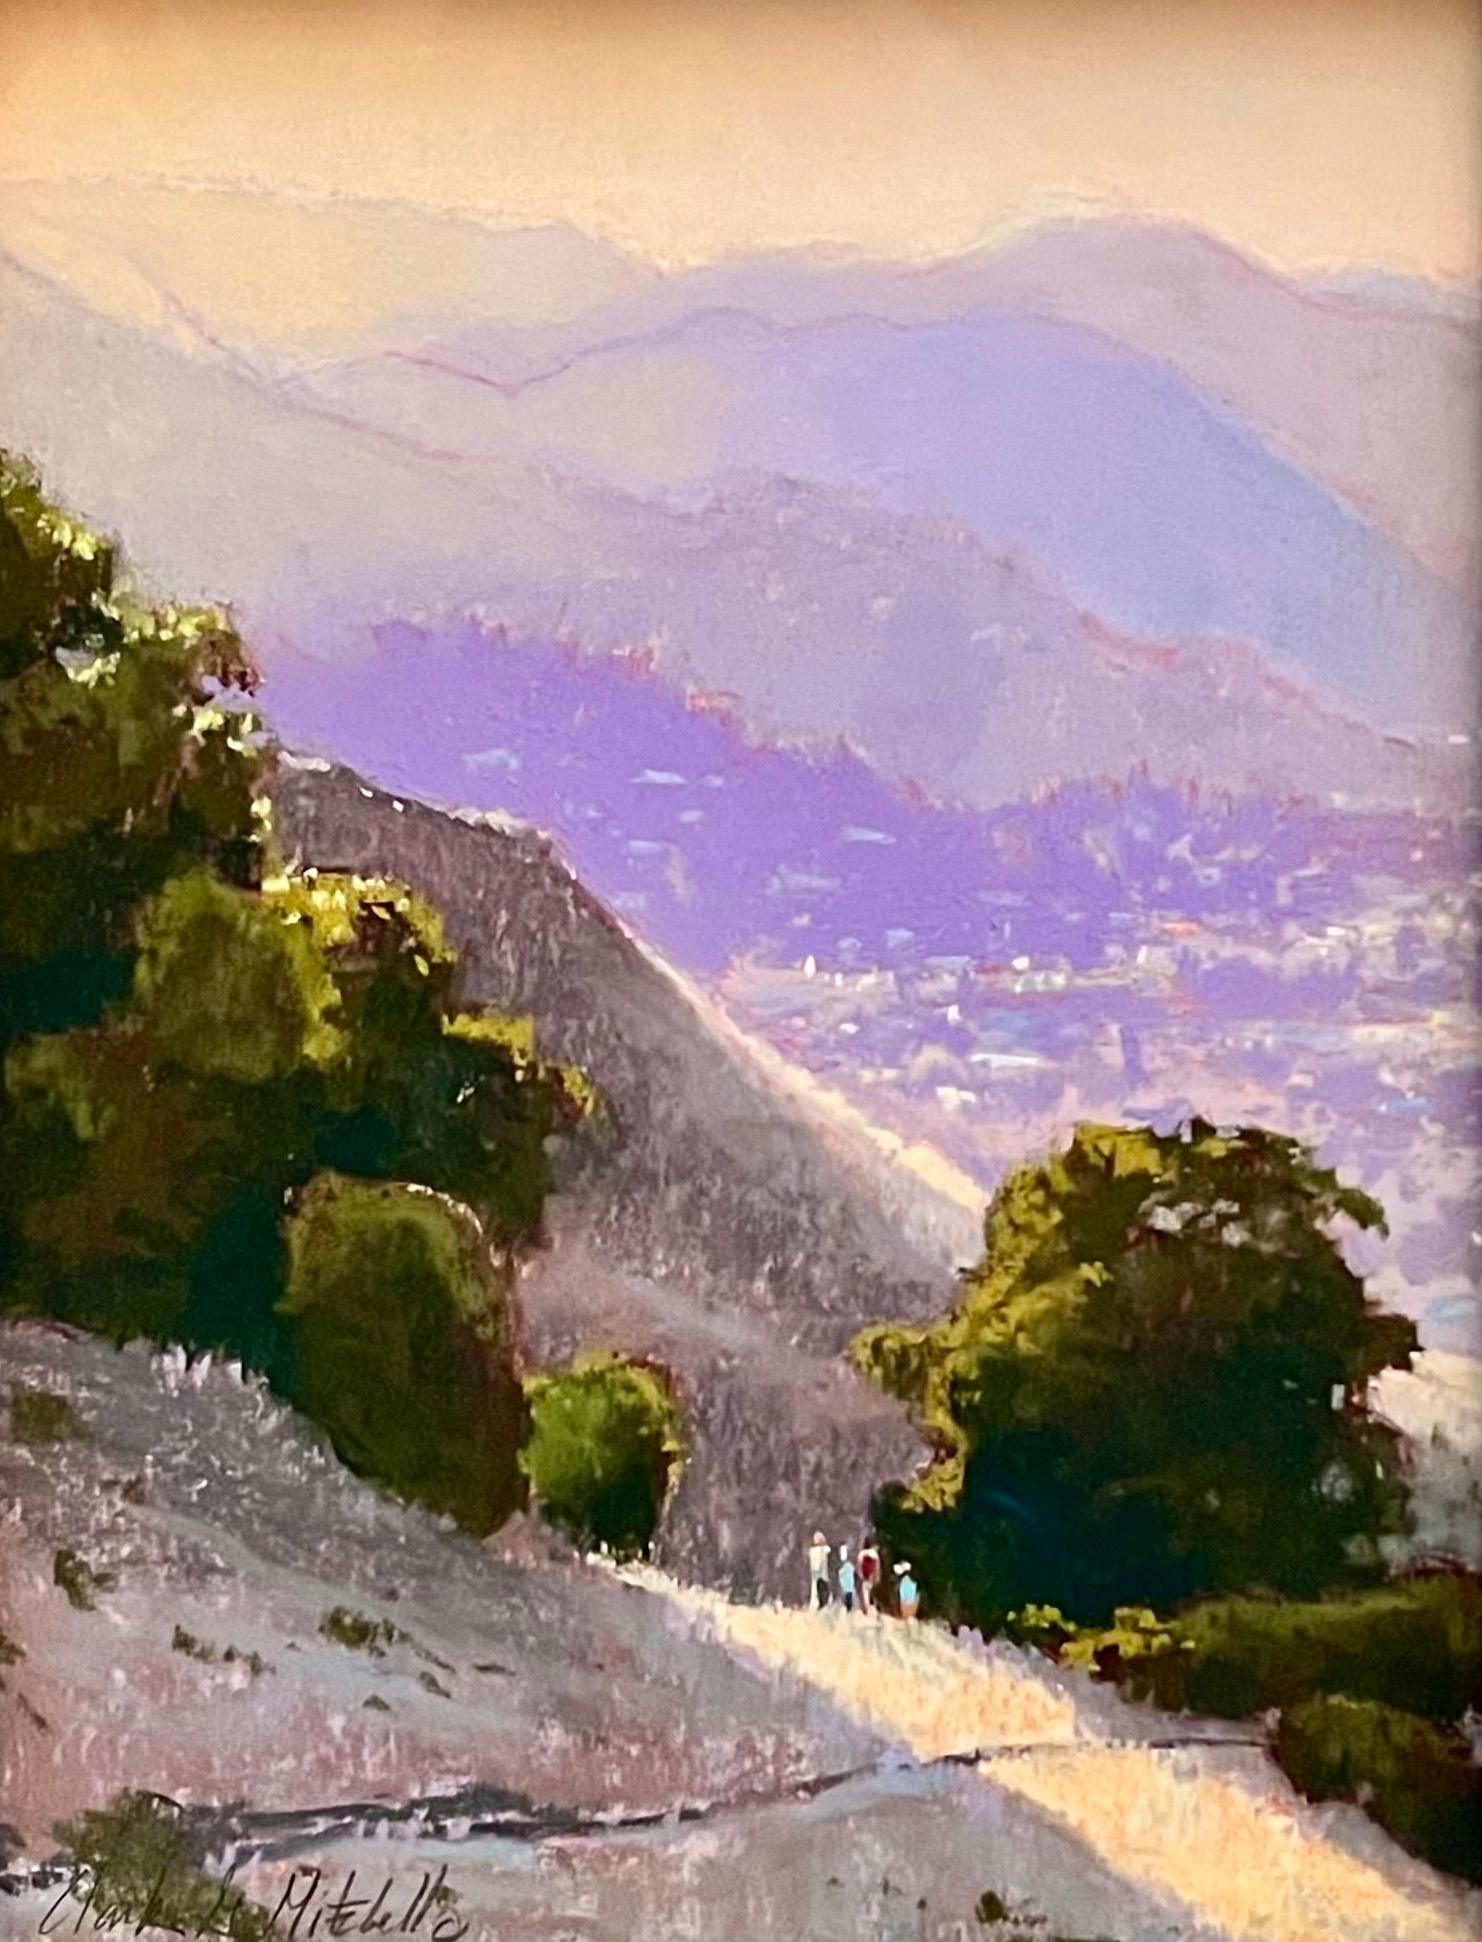 "Hazy Day Hikers"  is a plein air pastel painting by Cotati, CA based artist Clark Mitchell. This sublime piece depicts an aerial trail side view of a mountain side. Off in the distance, are hikers taking in the beautiful sunny day. Purple mountains